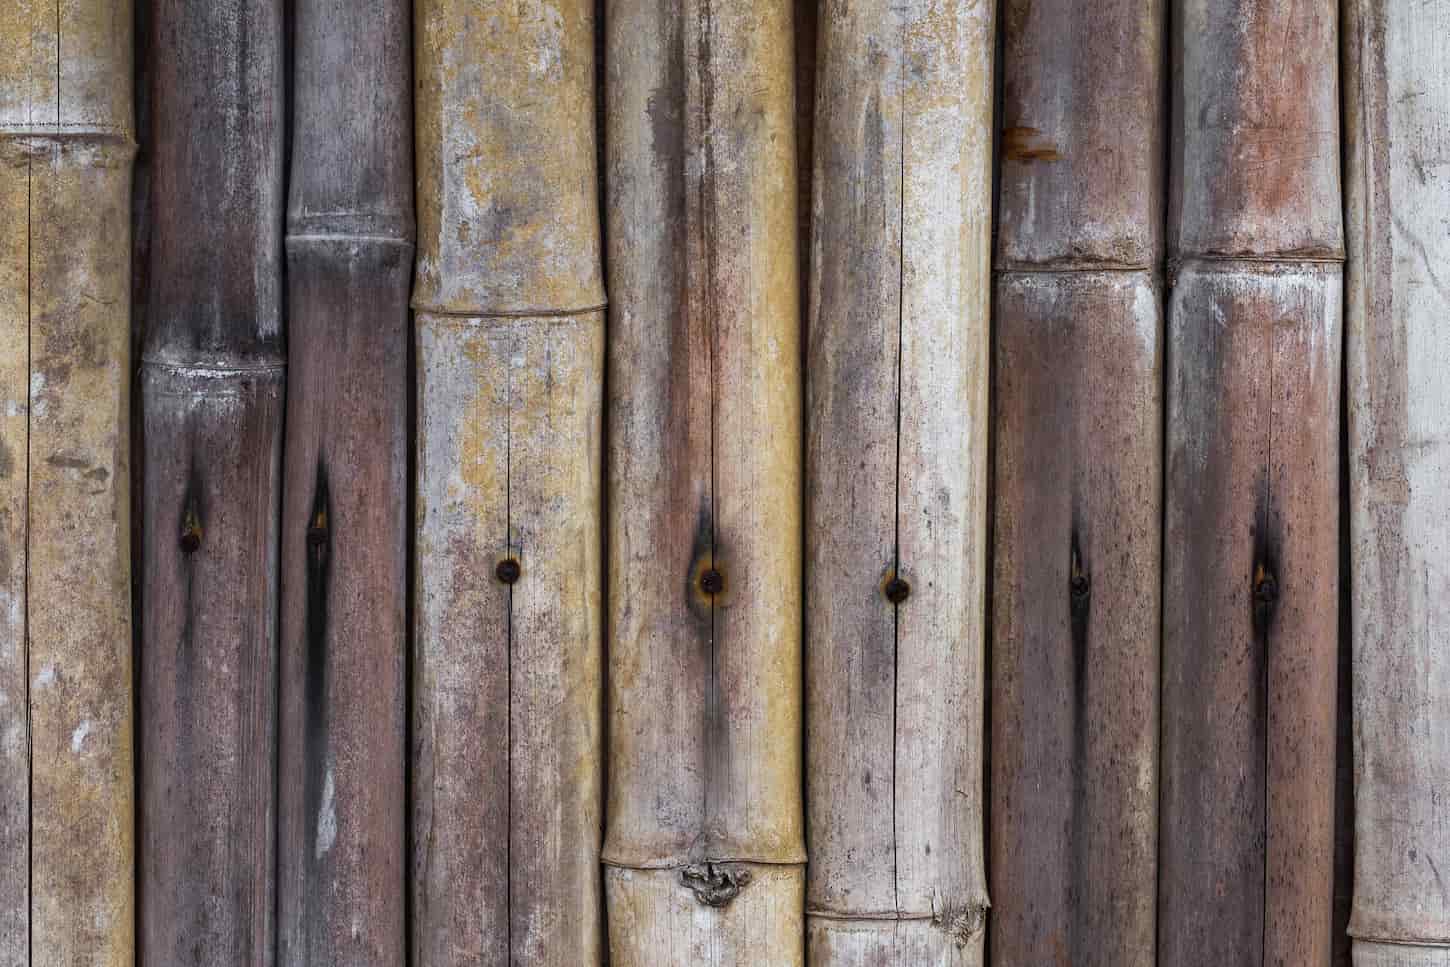 An image of an old stained bamboo fence.